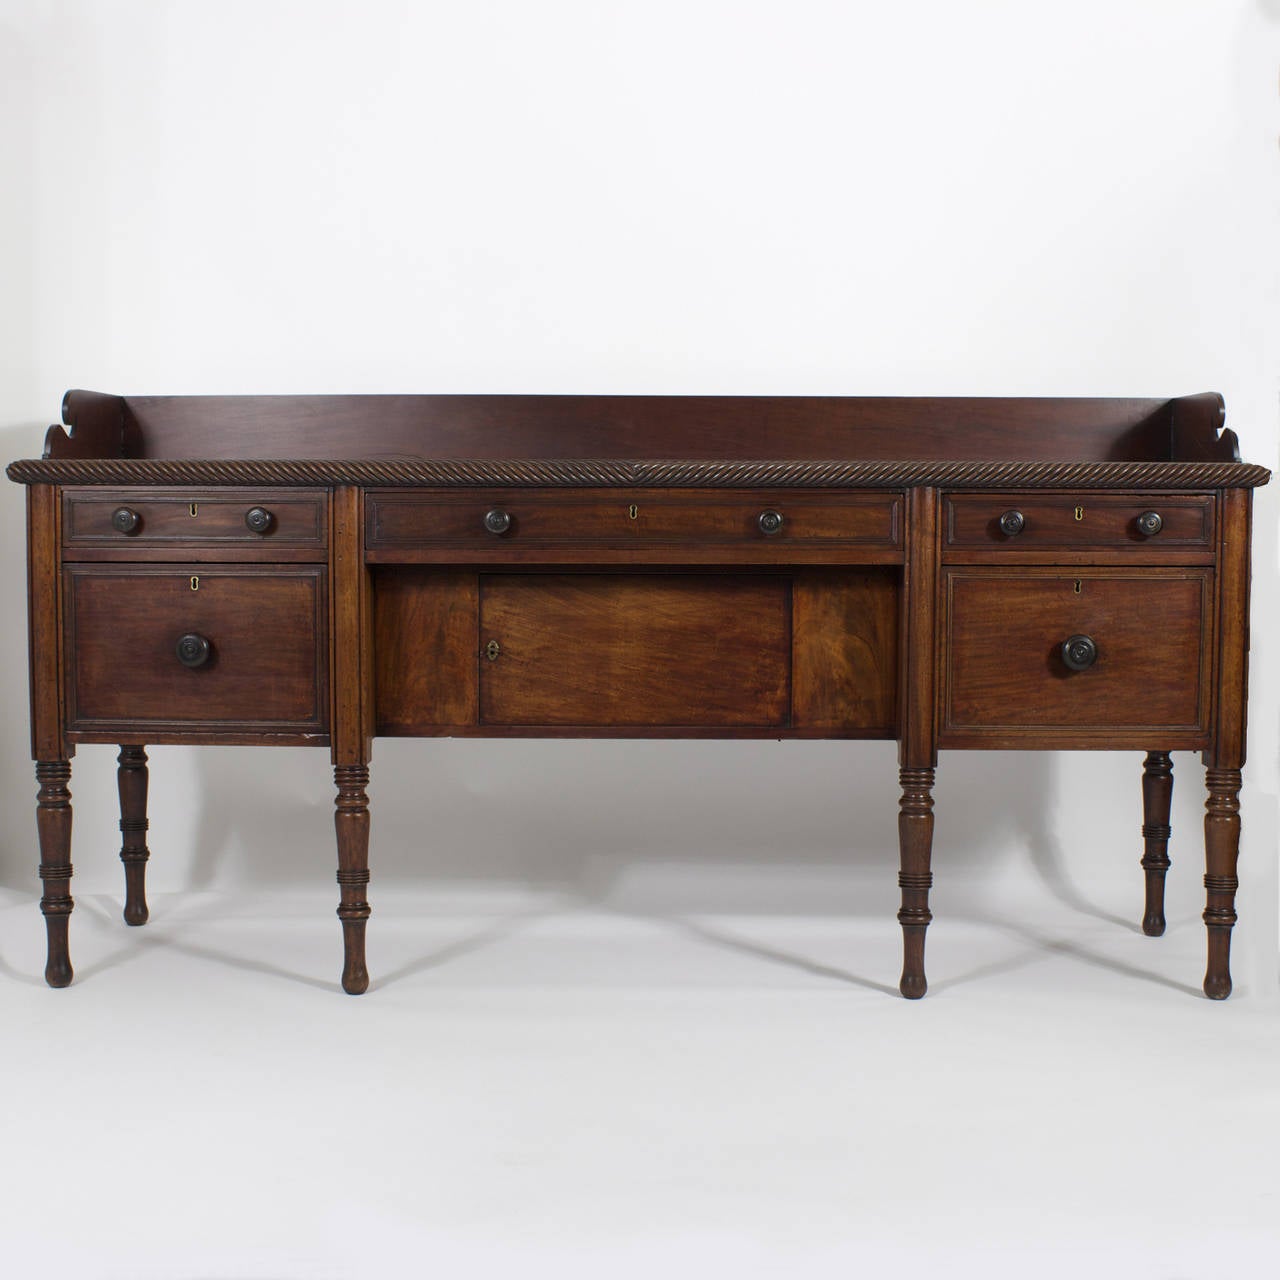 A 19th century, English mahogany sideboard or server with a real British Colonial vibe.  With all of the features that you want to see in a sideboard, 3  drawers and 3 doors (2 faux drawers (doors) flanking a central door, including a well